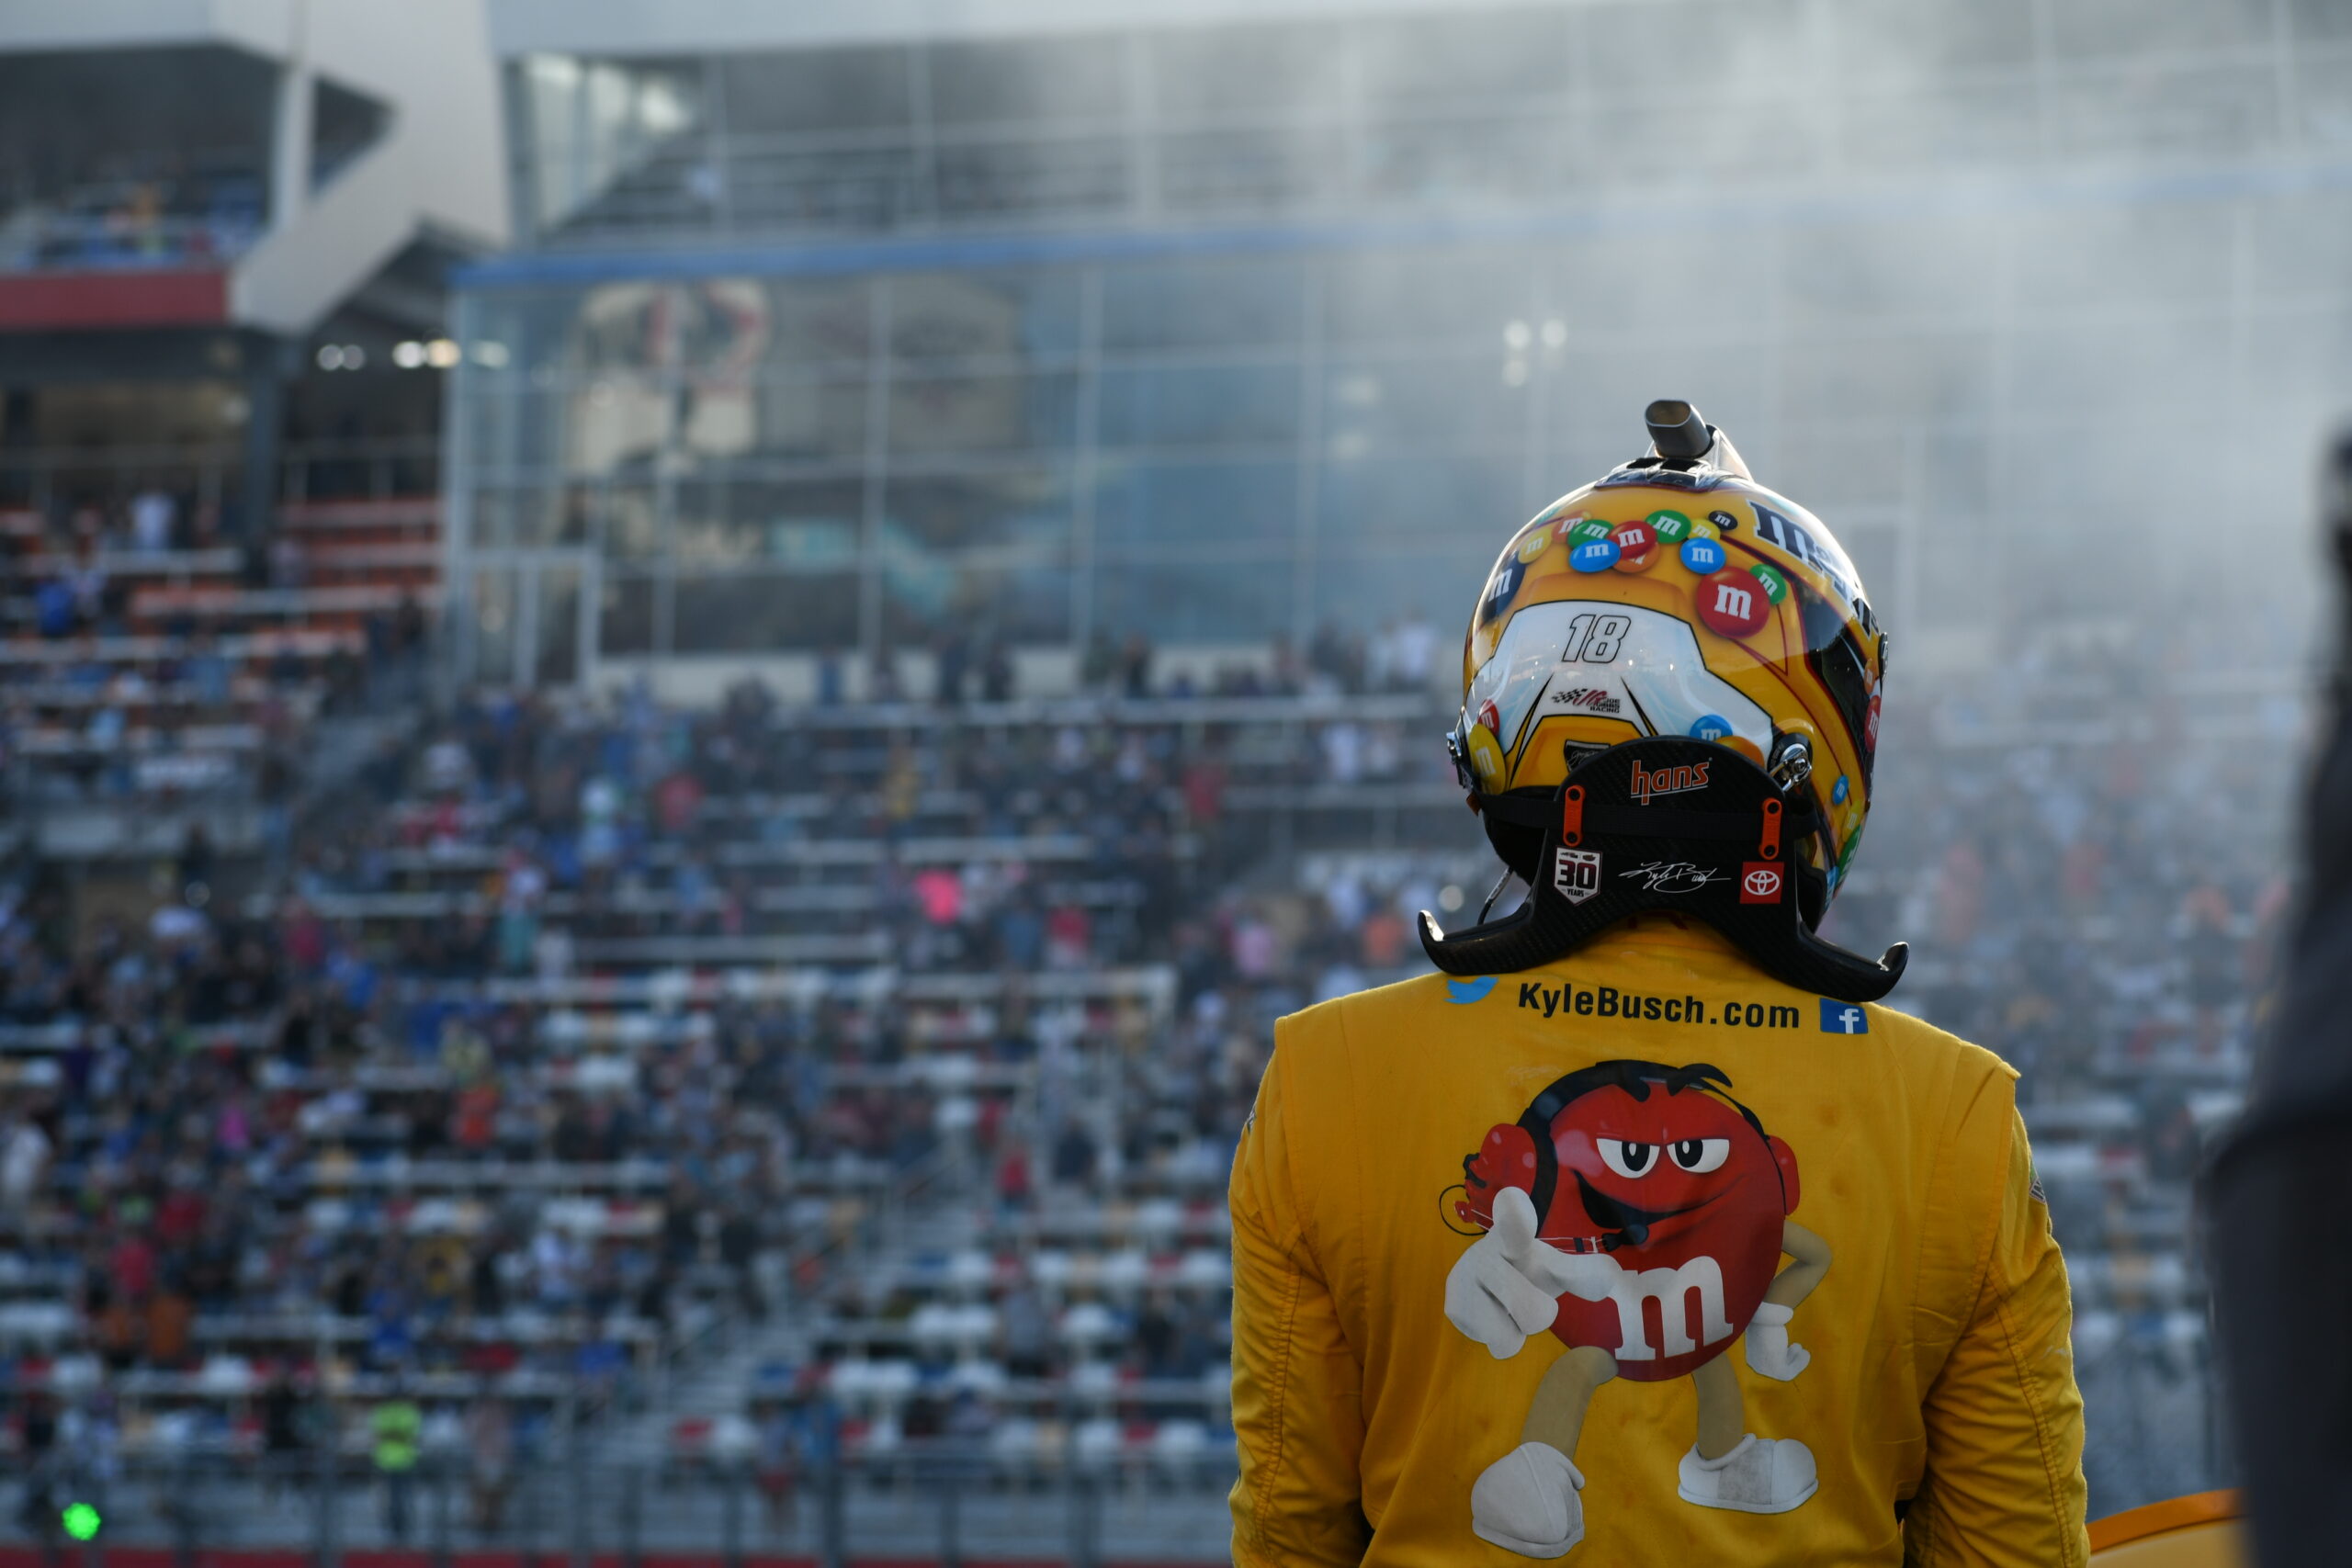 Might Kyle Busch's championship dreams end in smoke after the Round of 8? (Photo: Michael Guariglia | The Podium Finish)